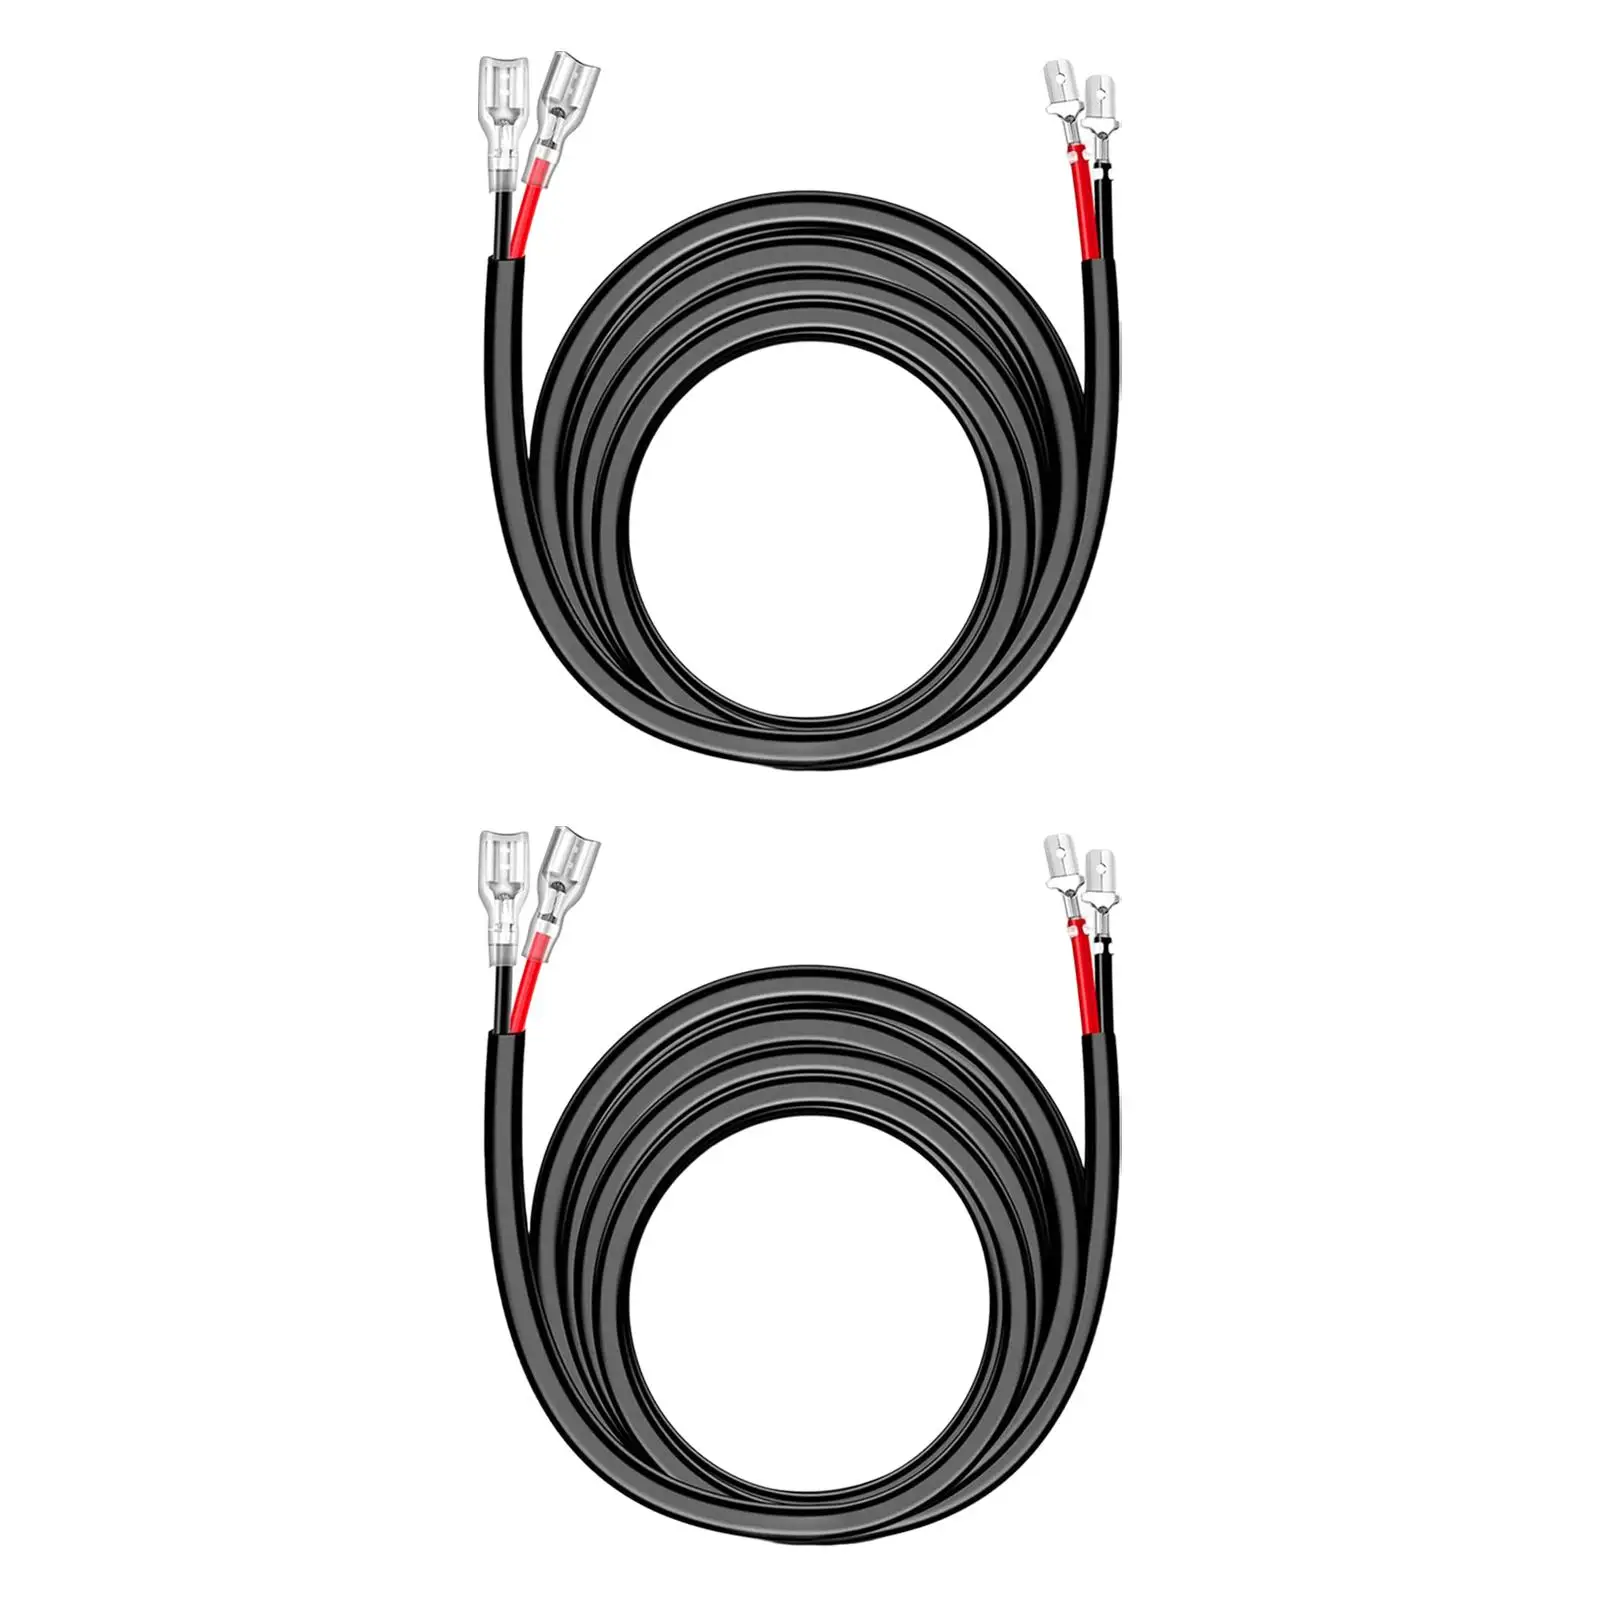 2x 16AWG Extension Wiring Harness High Performance for Yachts Lights Replaces